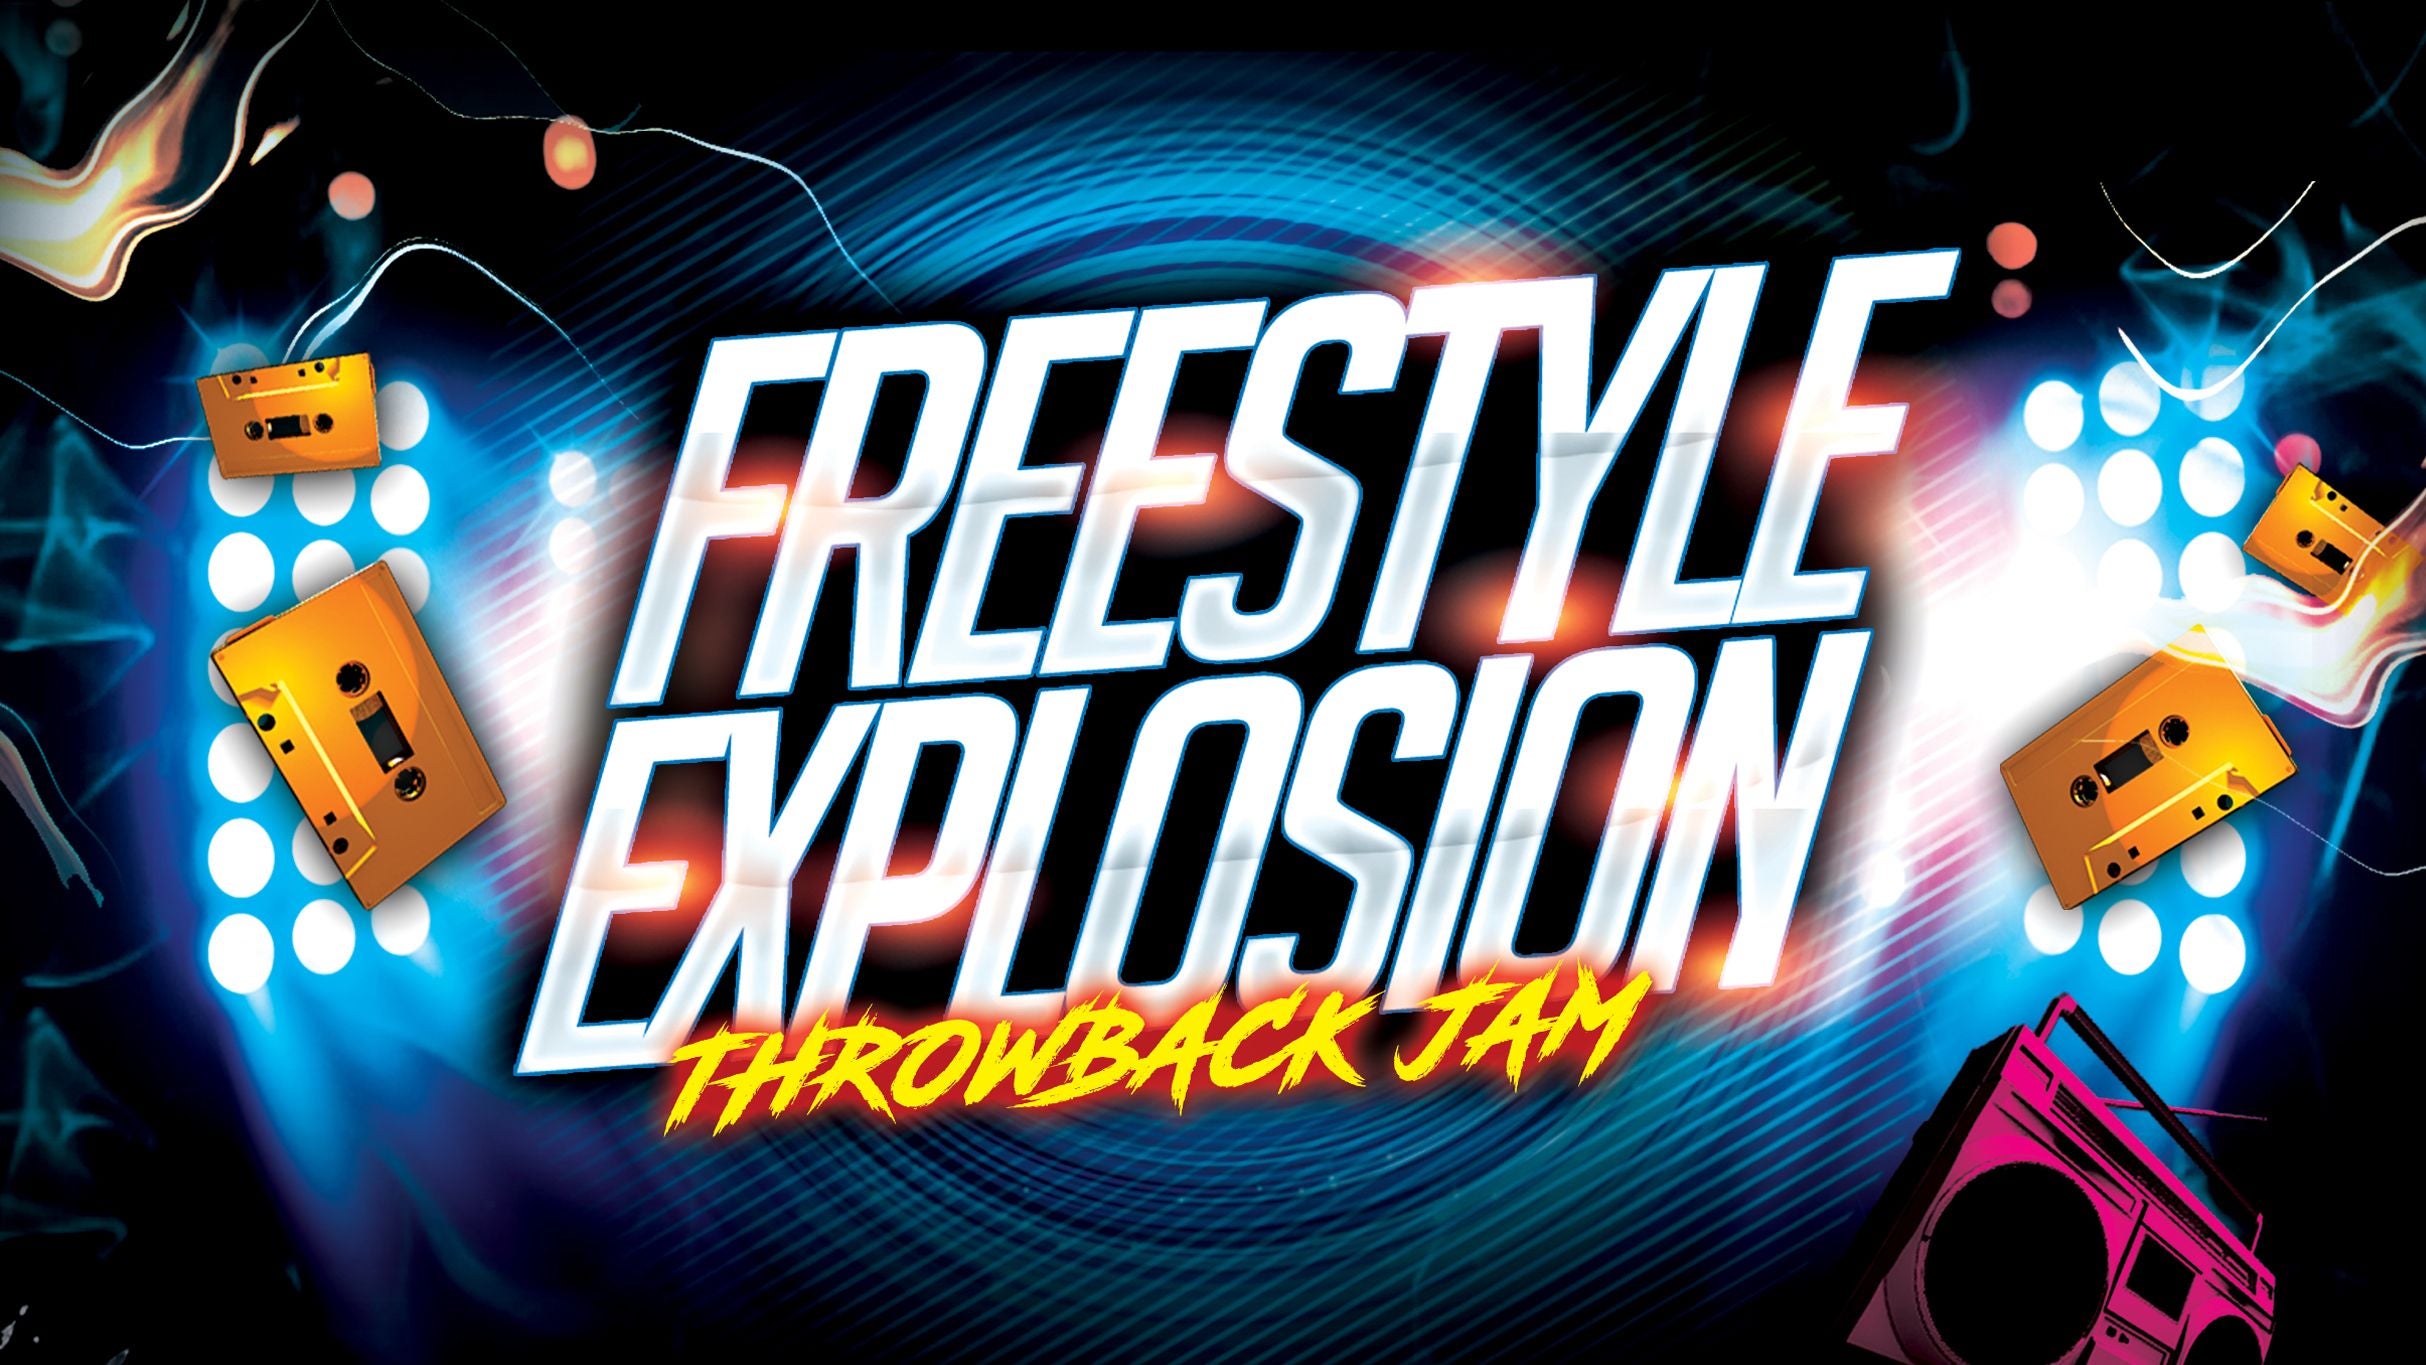 Freestyle Explosion in Palm Desert promo photo for 2 For 1 presale offer code